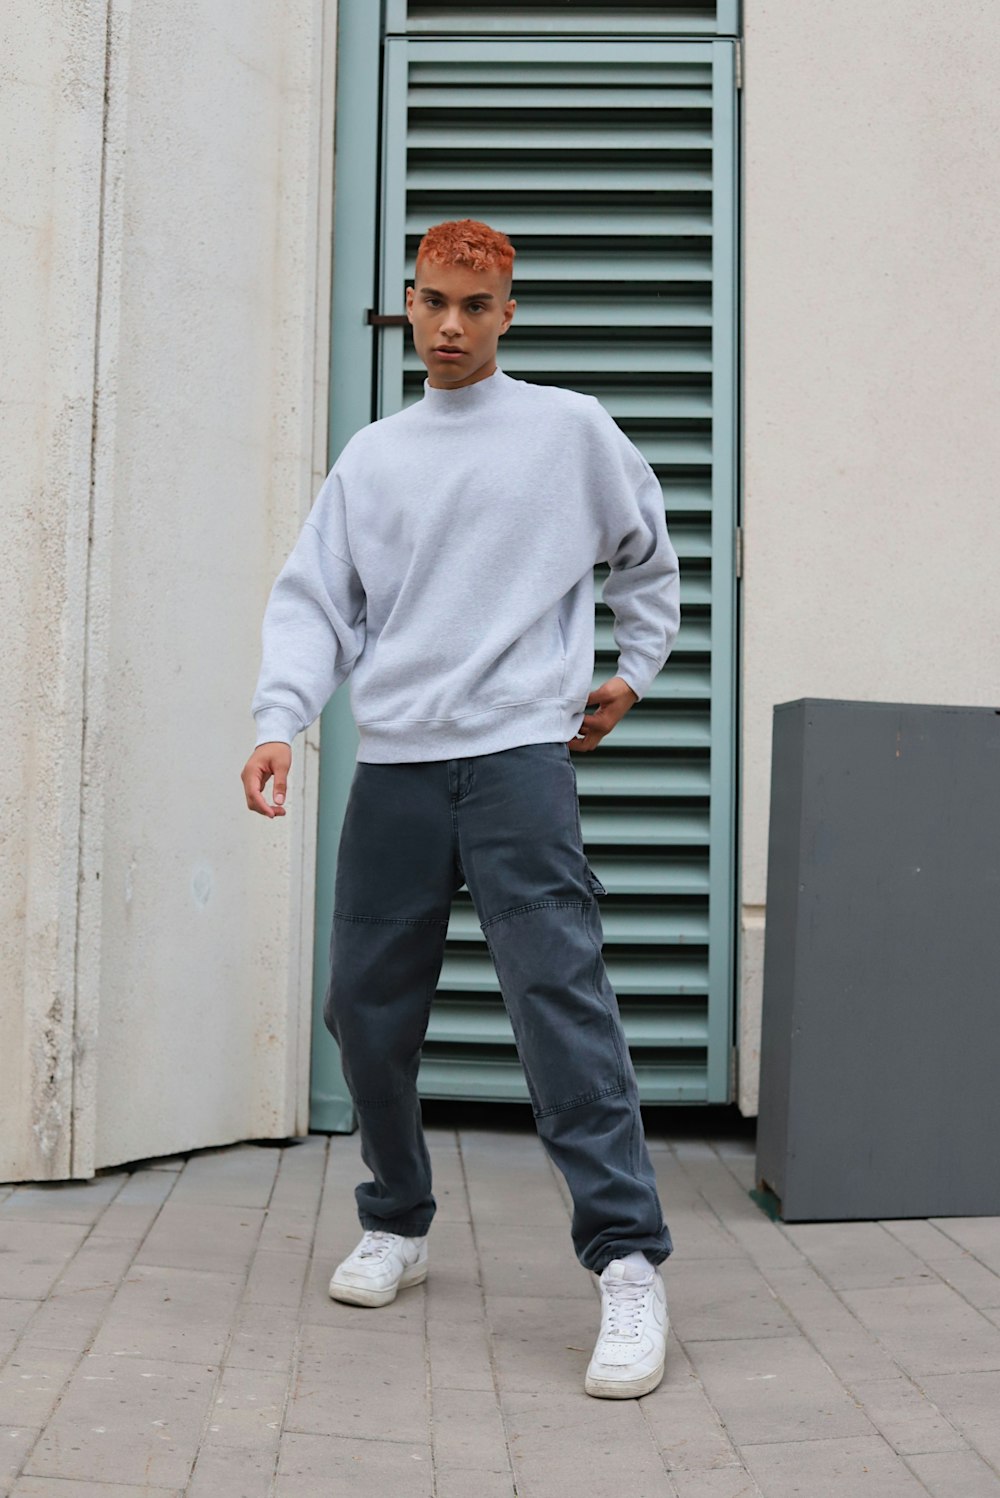 a man standing on a sidewalk wearing a sweater and sweatpants